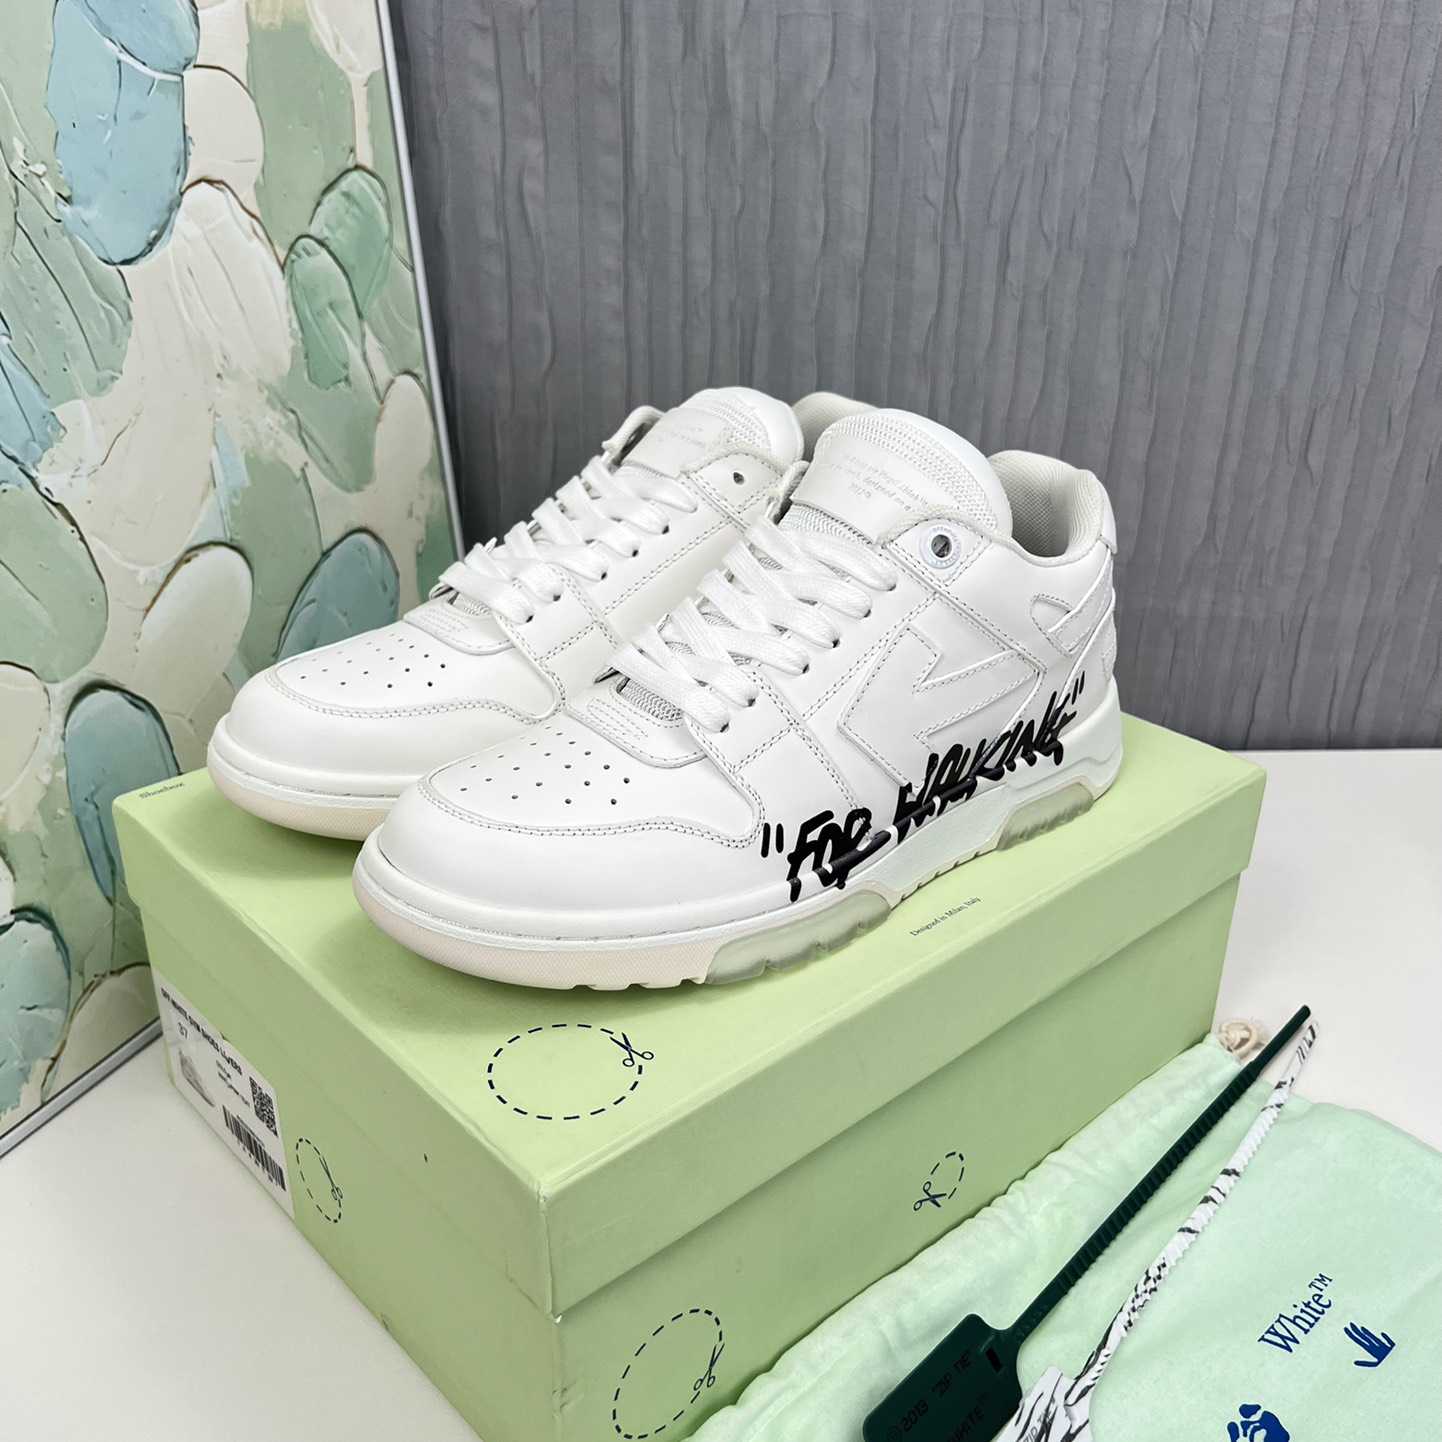 Off White Out Of Office "For Walking" Sneakers  - DesignerGu